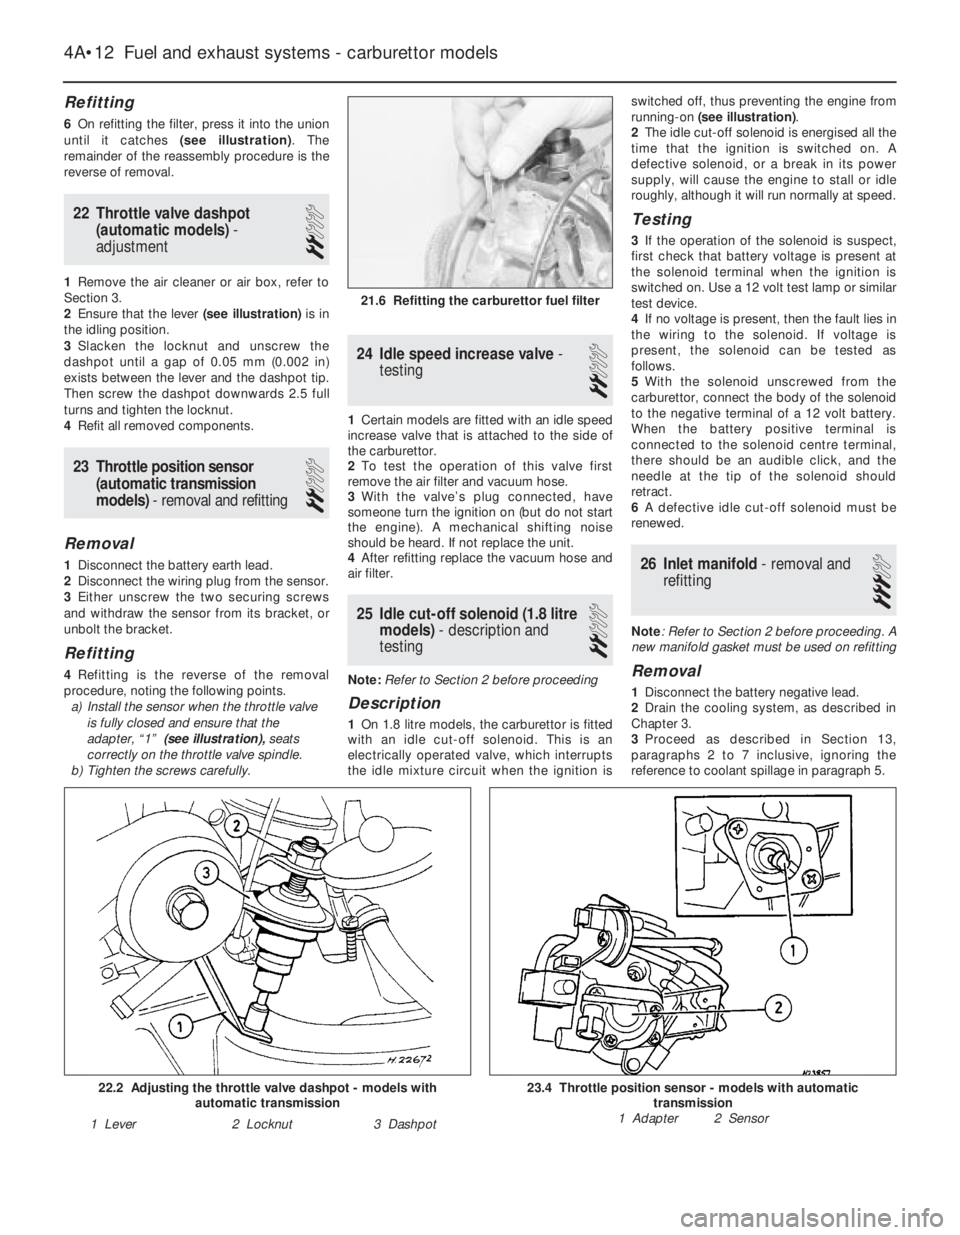 OPEL CALIBRA 1988  Service Repair Manual Refitting
6On refitting the filter, press it into the union
until it catches (see illustration). The
remainder of the reassembly procedure is the
reverse of removal.
22Throttle valve dashpot
(automati